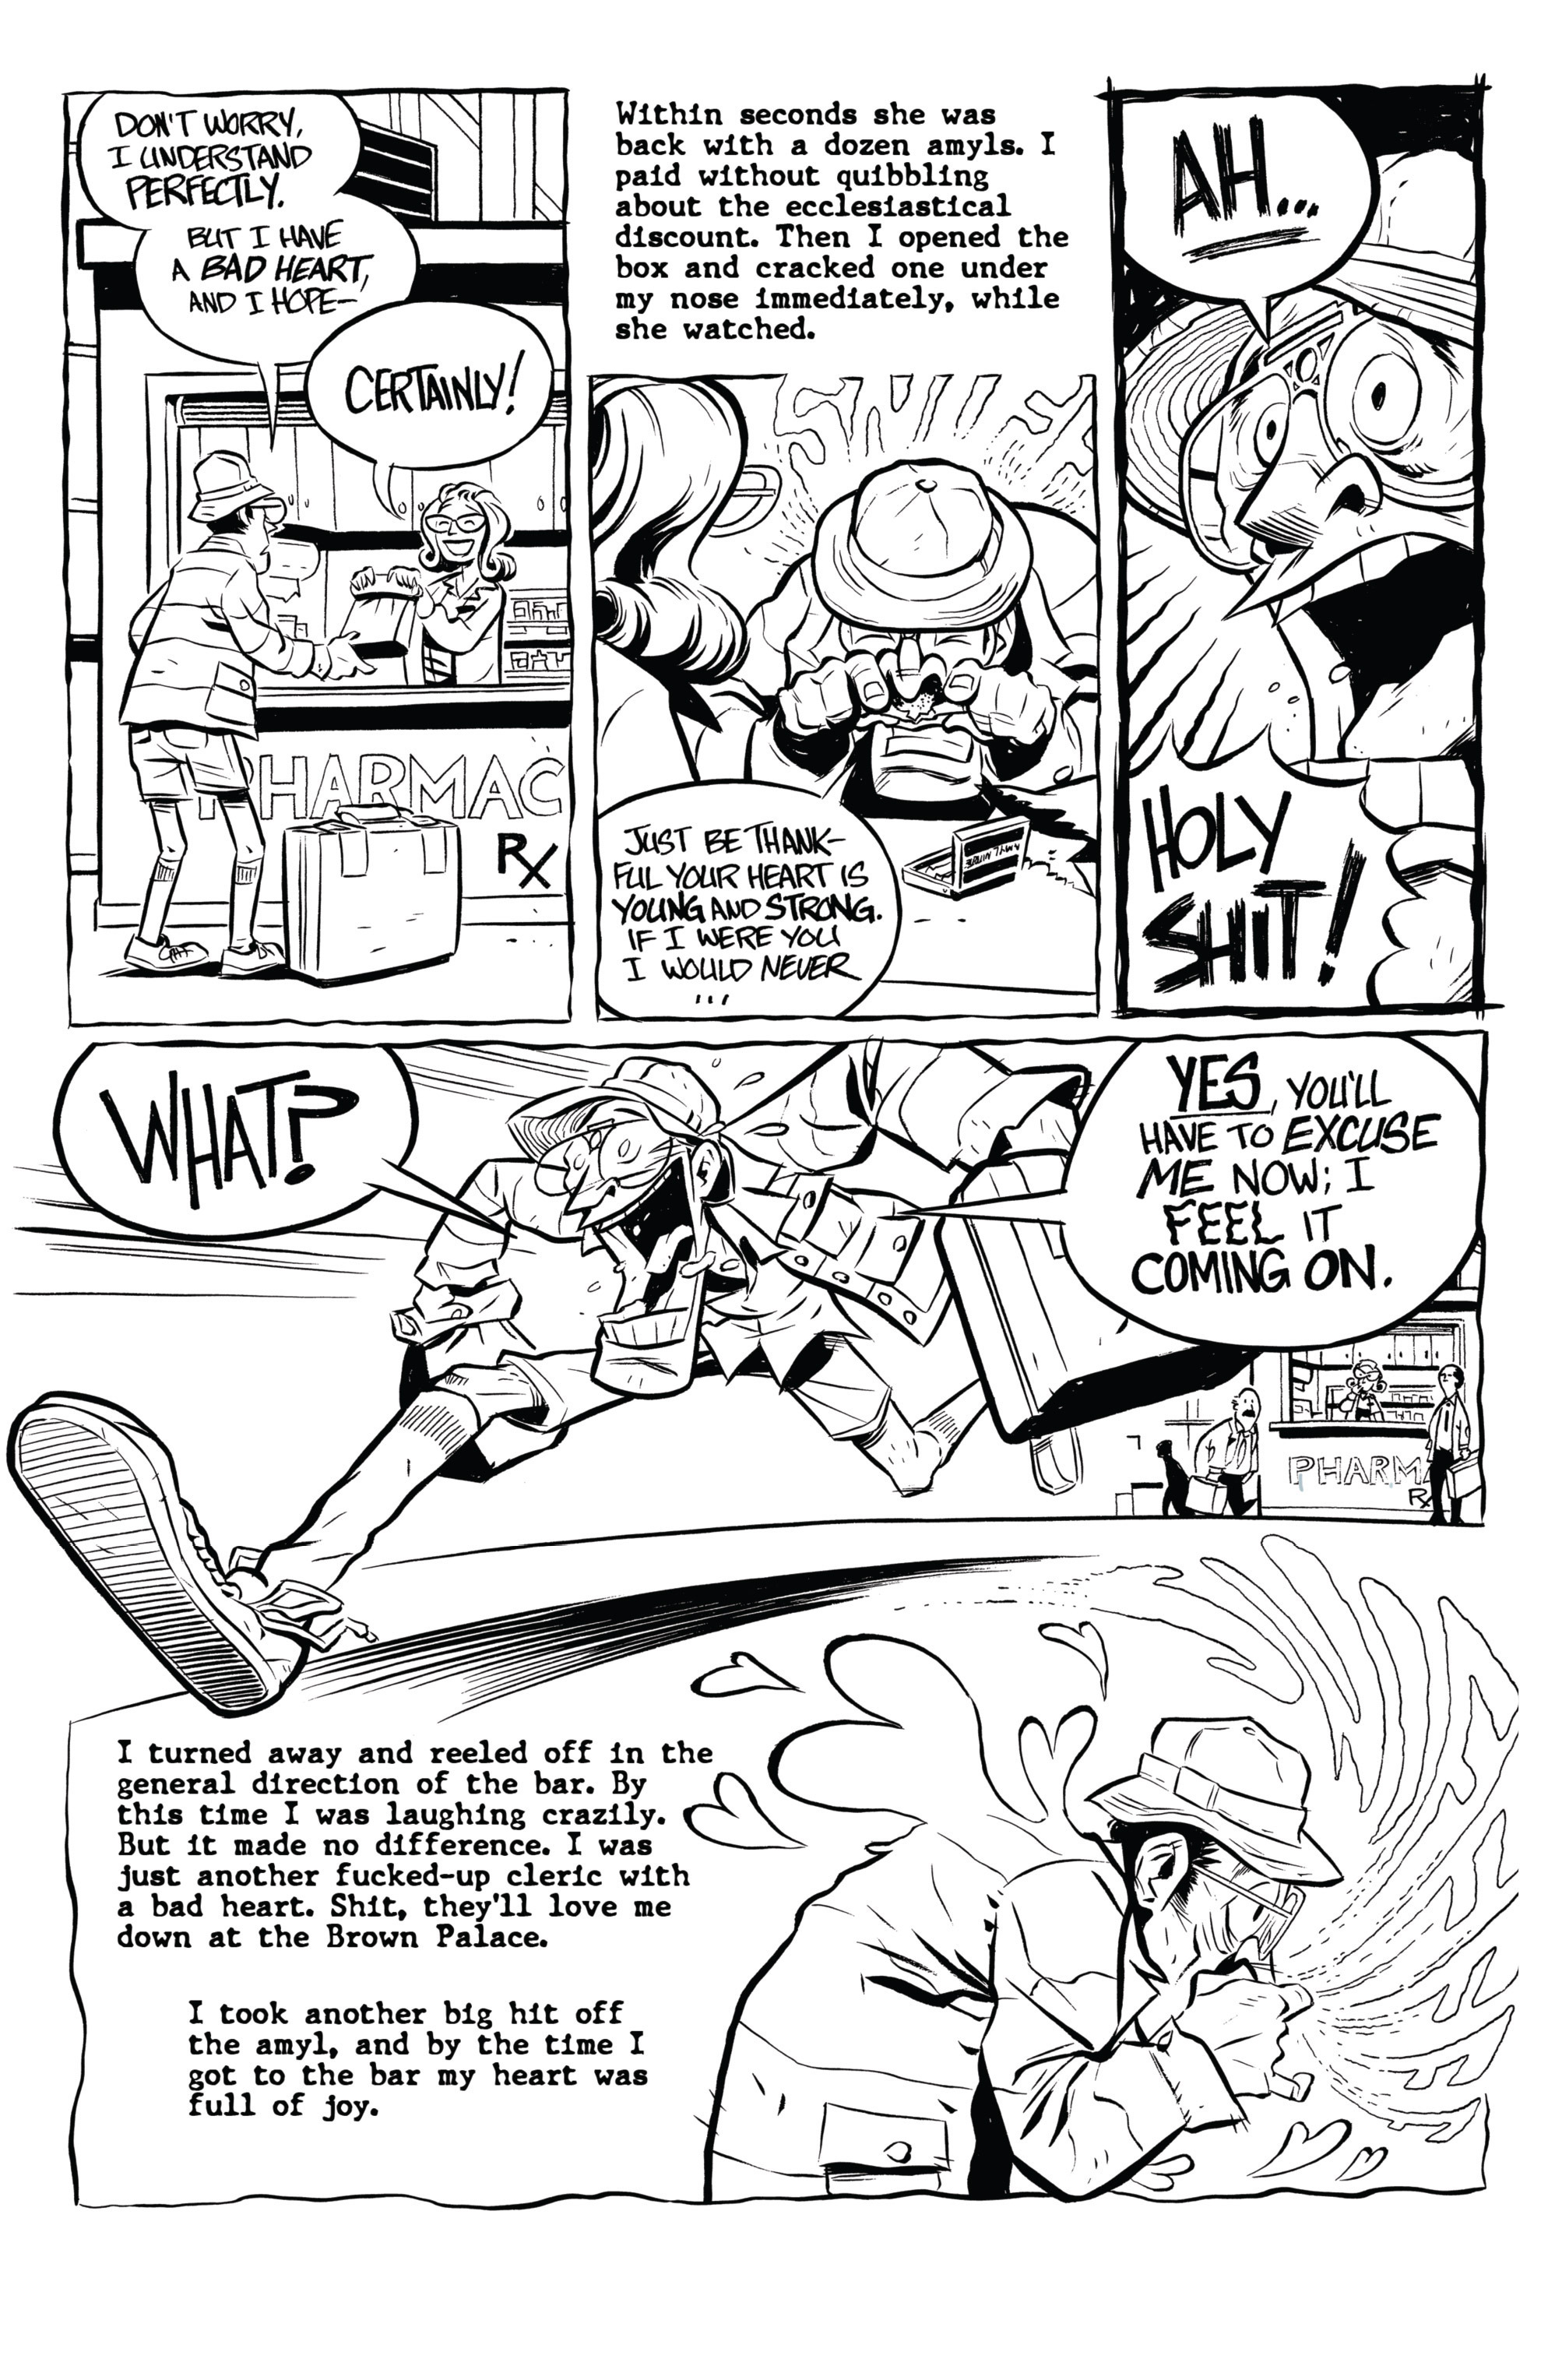 Read online Hunter S. Thompson's Fear and Loathing in Las Vegas comic -  Issue #4 - 43